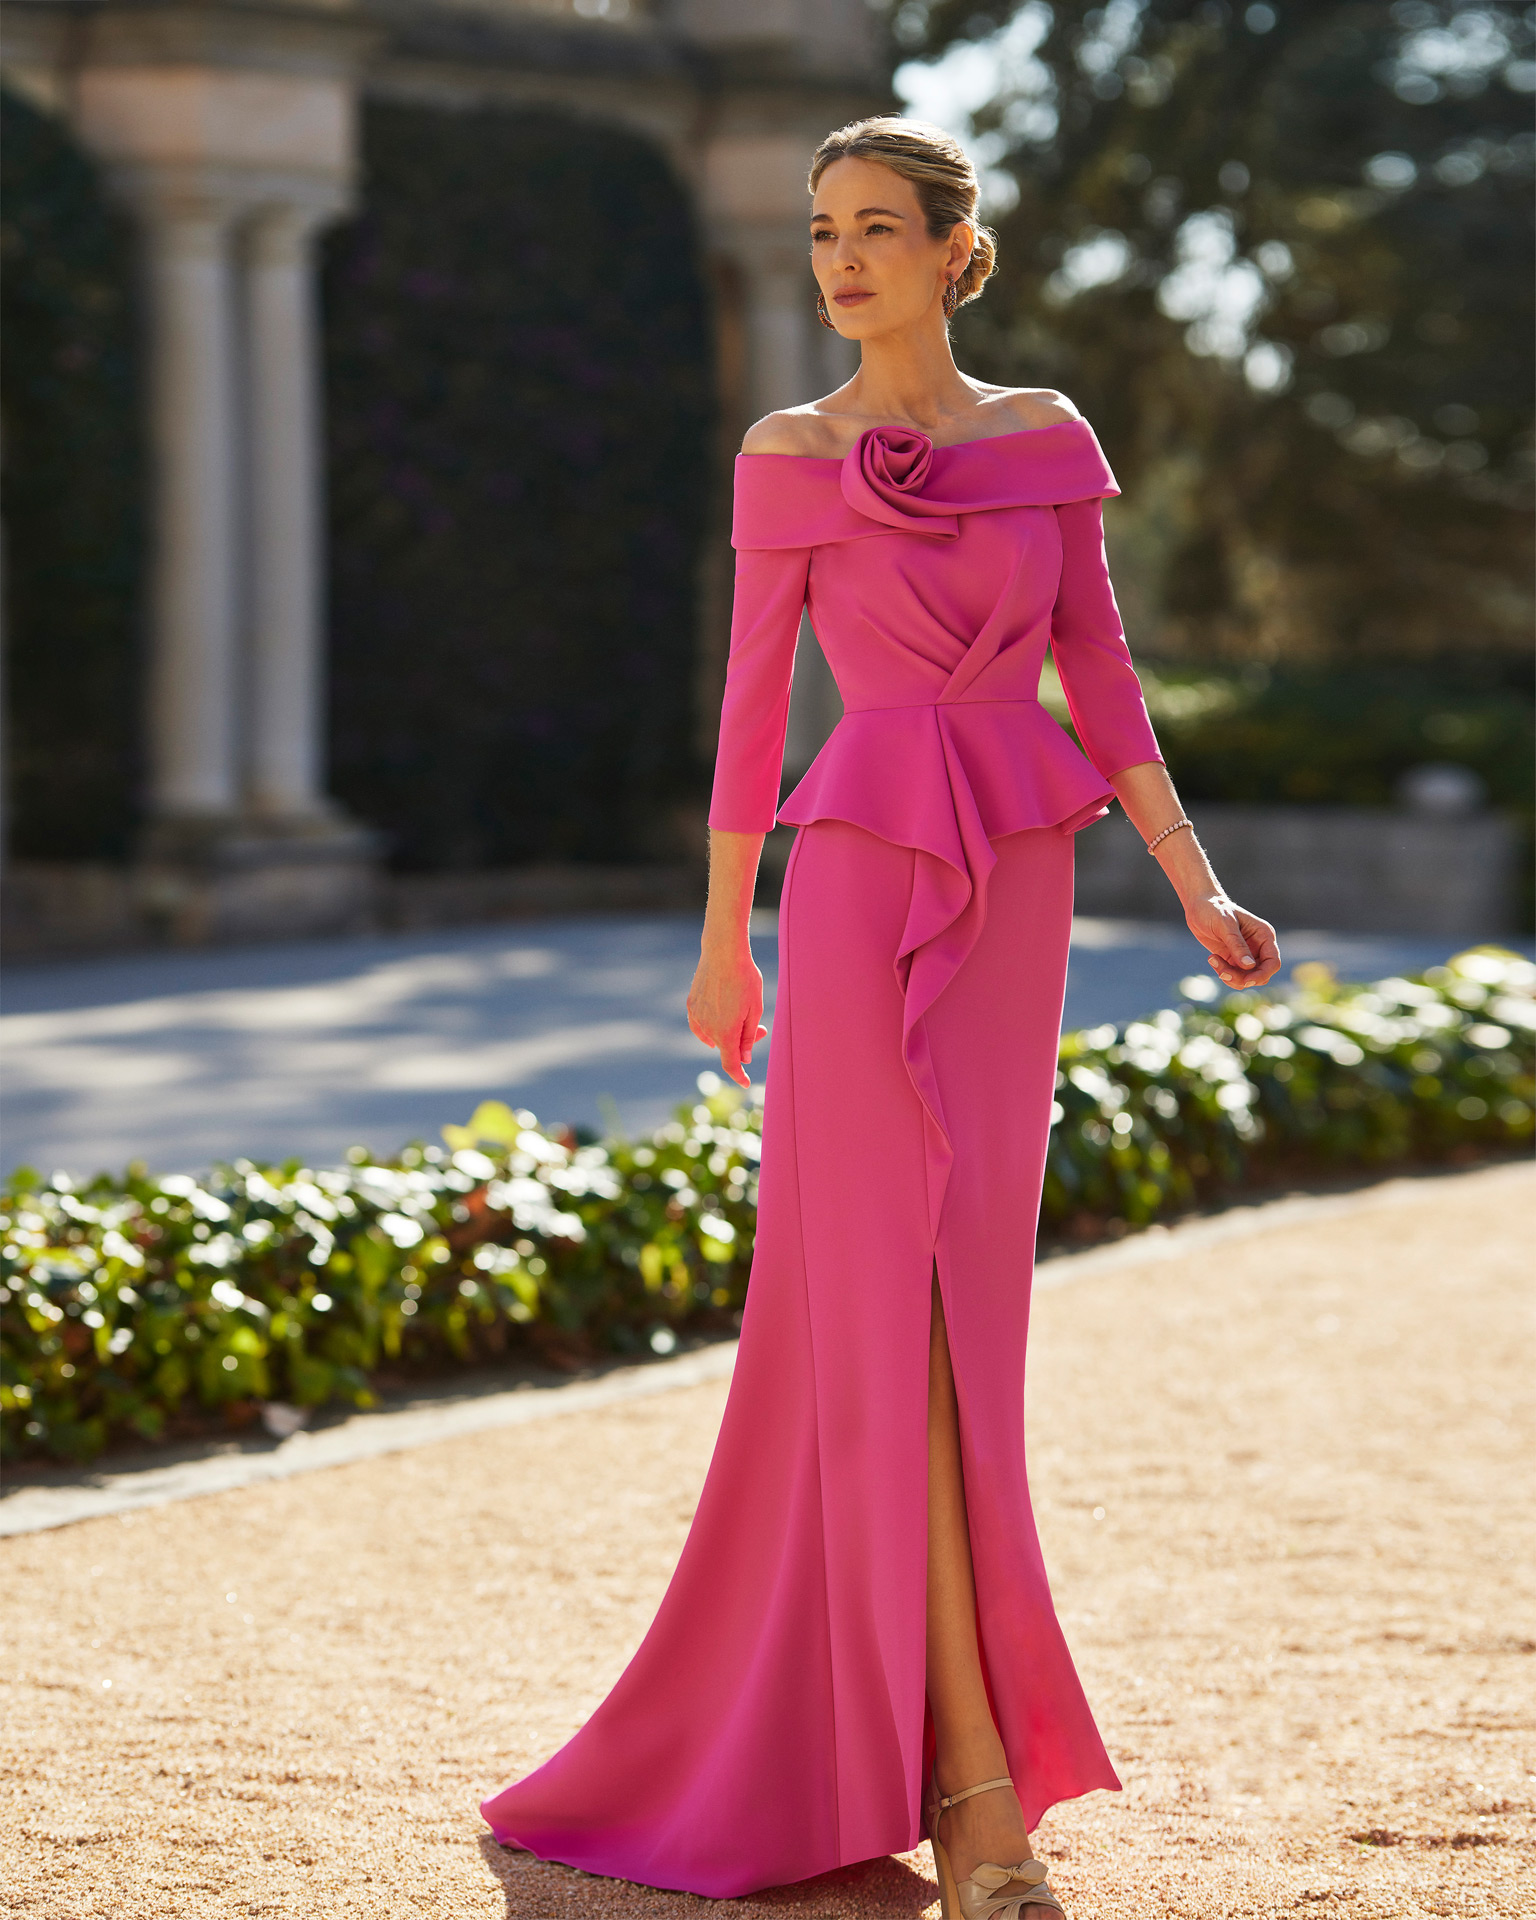 Elegant long cocktail dress. Crafted in crêpe. With off-the-shoulder neckline and three-quarter sleeves with side slit. Couture Club design. MARFIL_BARCELONA.